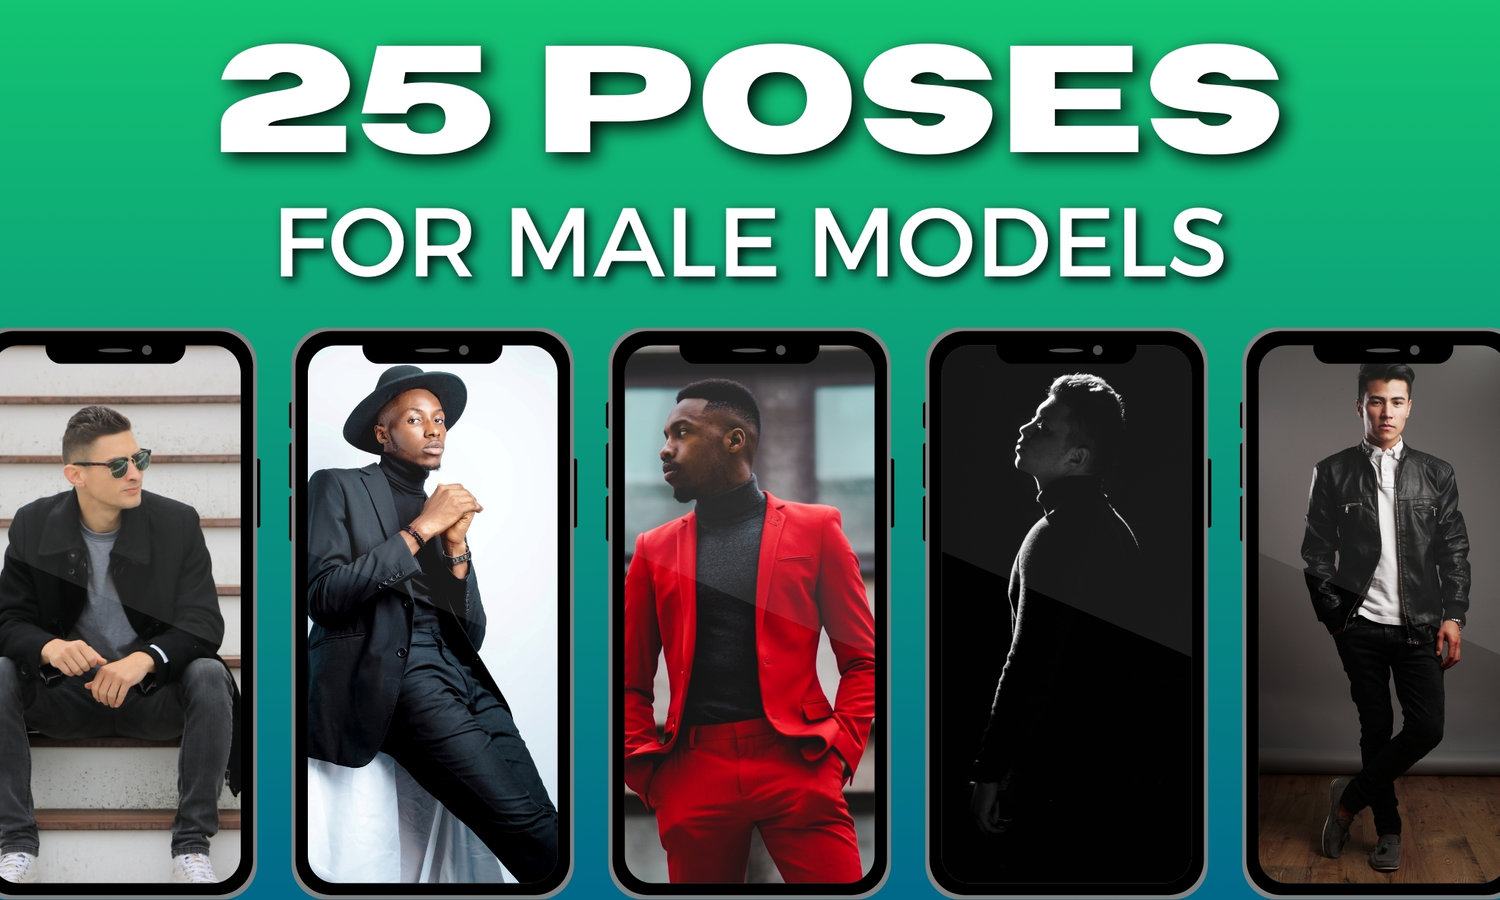 101 Guide Photo Poses for Boy, How to be a Male Model & Pose Techniques -  abrittonphotography